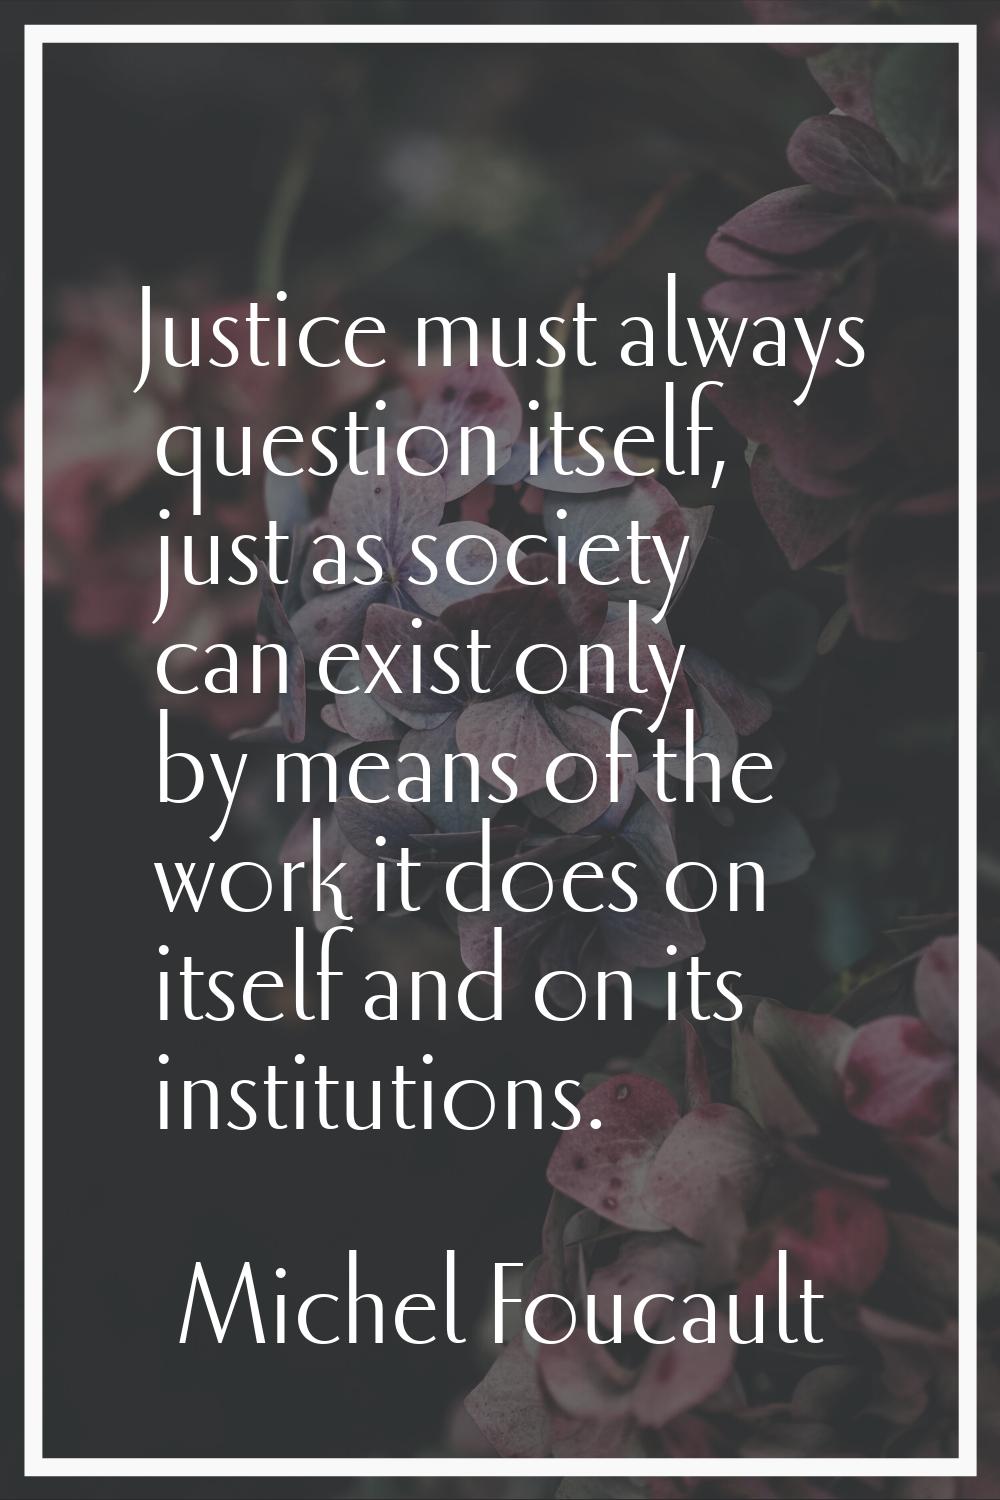 Justice must always question itself, just as society can exist only by means of the work it does on